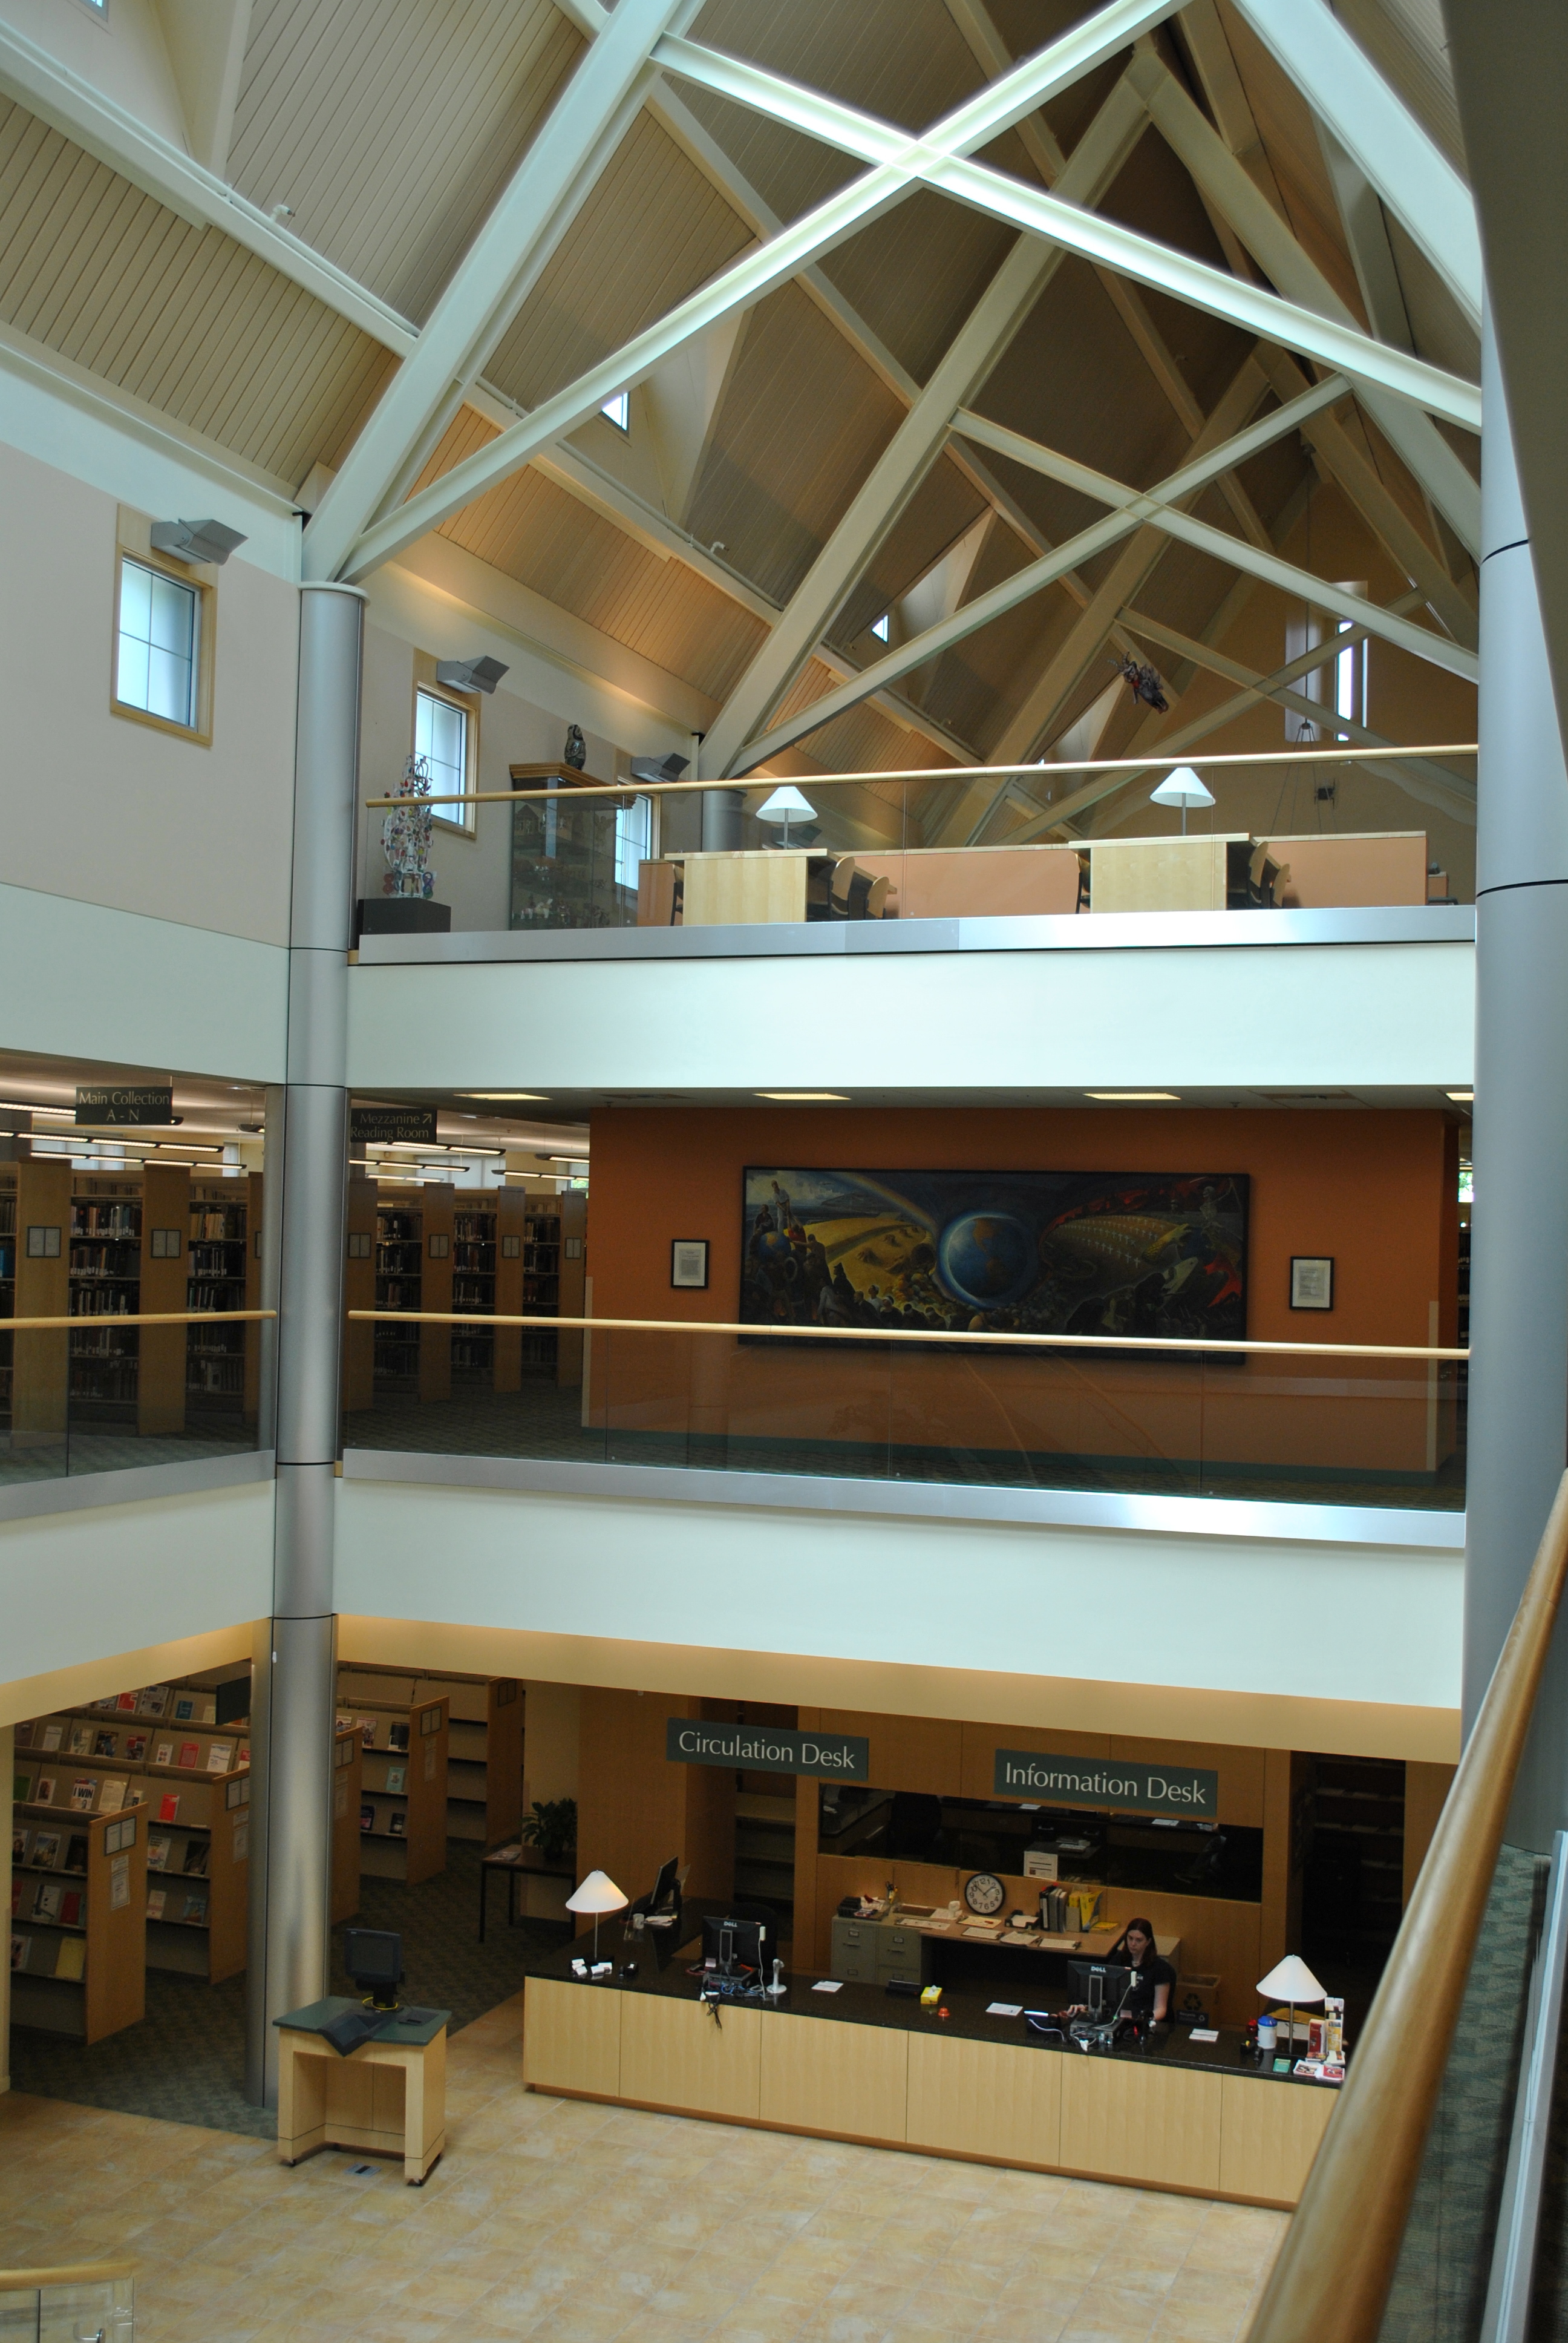 This image shows a large open area inside a building. There are three floors visible along with a valted ceiling.